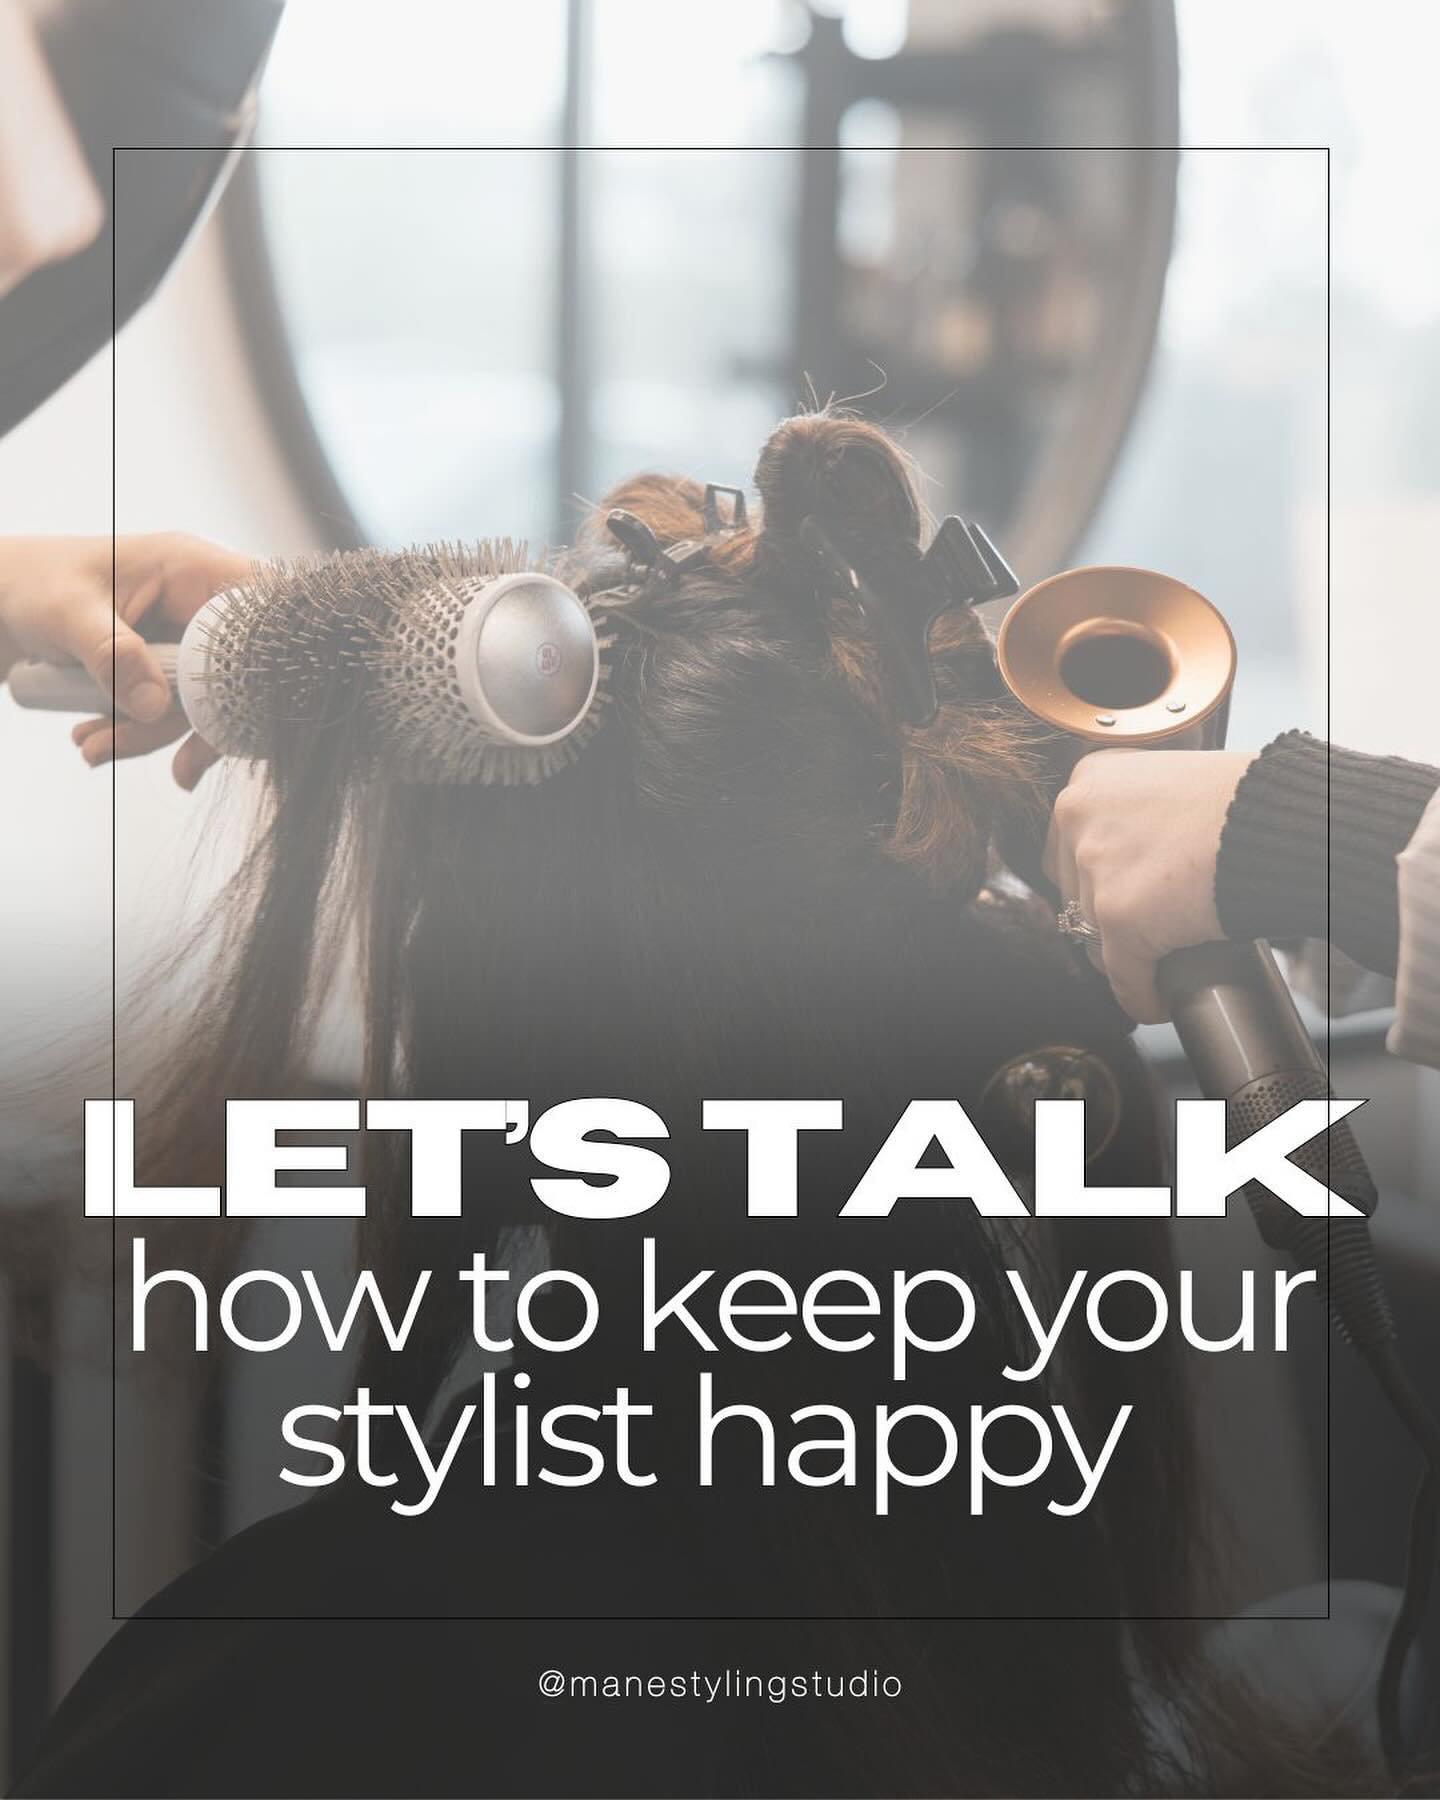 A happy stylist equals happy hair! 😄

Just a few things you can do before your appointment to get the best experience possible:
✨Text us your inspo pics! We love seeing visuals of what you&rsquo;re wanting so we&rsquo;re both on the same page. 
✨Mai